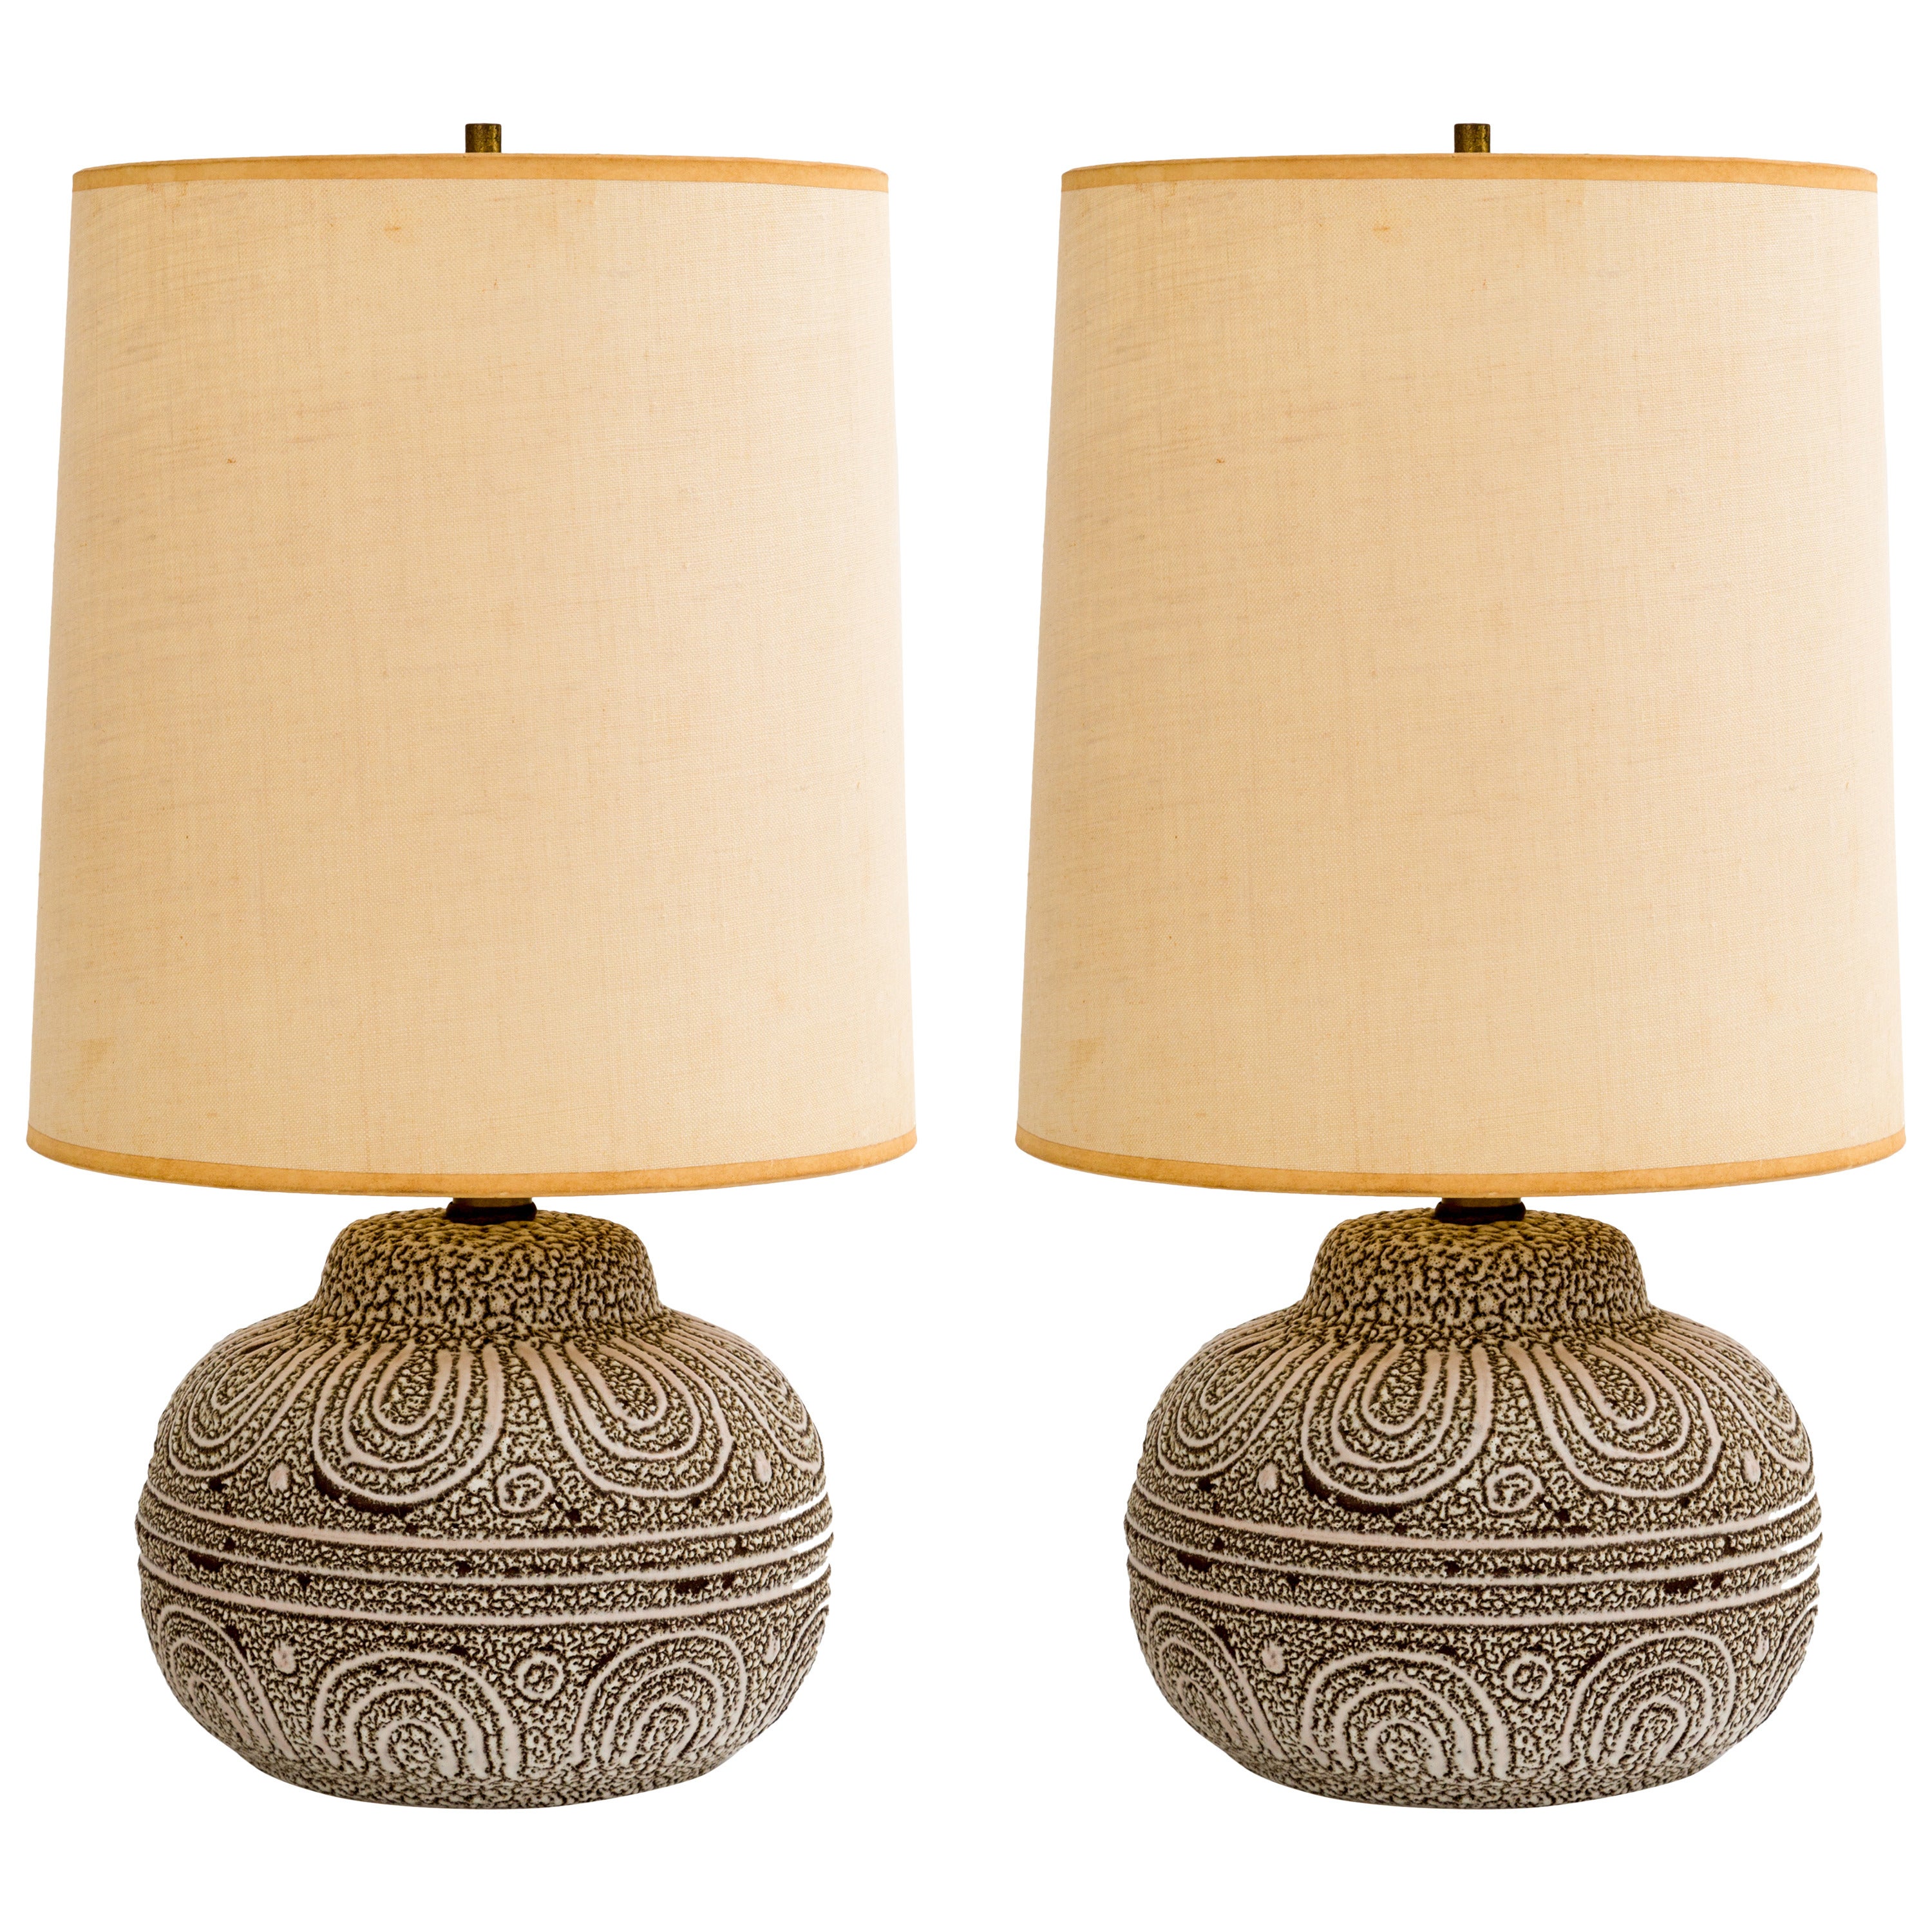 1950s French Ceramic Pottery Lamps